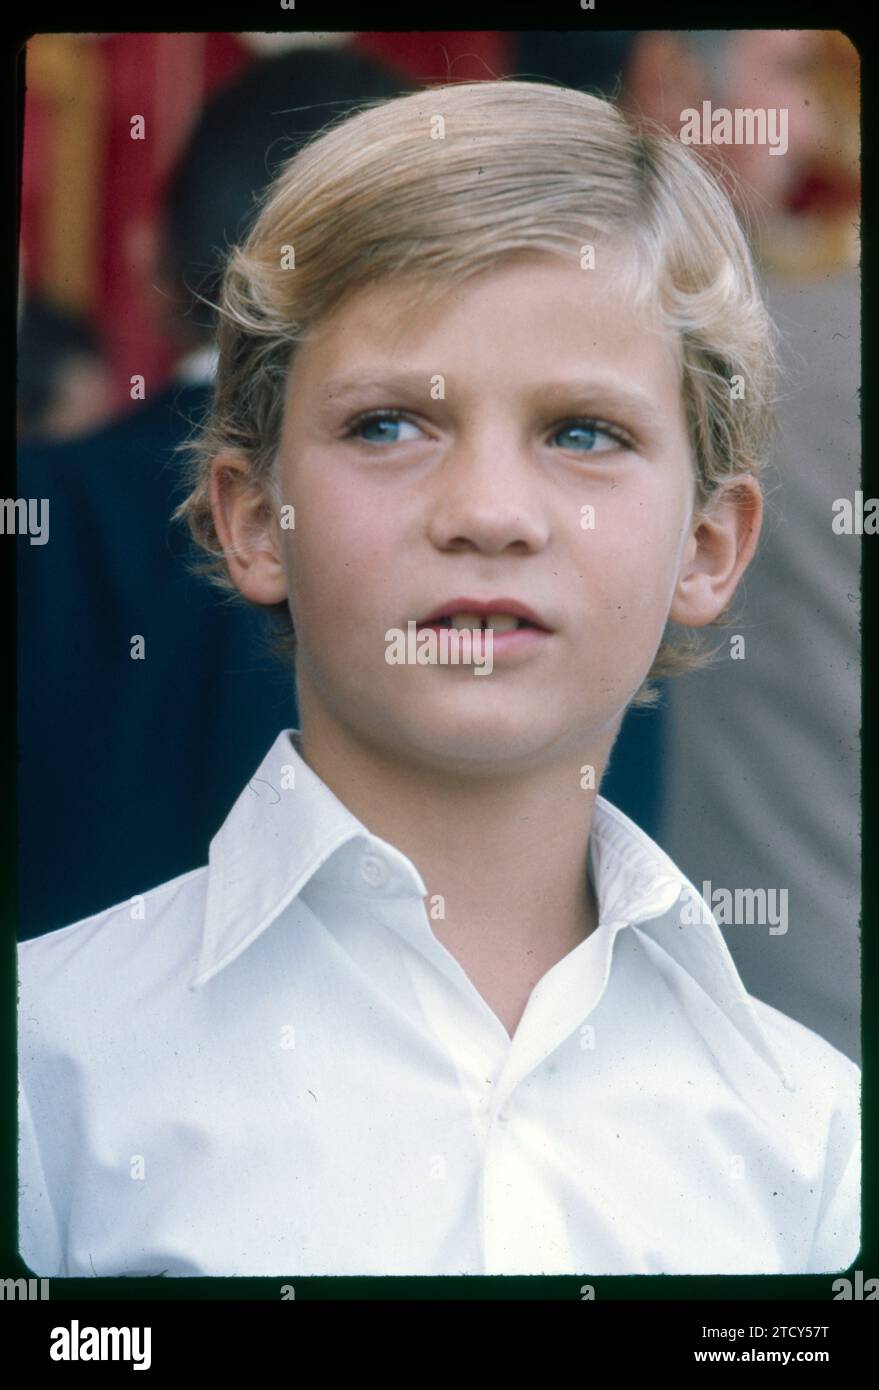 Madrid, 09/23/1976. Party of the Municipal Police of Madrid. In the image, a close-up of Prince Felipe, who presided over the Party, and who was named honorary agent. Credit: Album / Archivo ABC / Teodoro Naranjo Domínguez Stock Photo